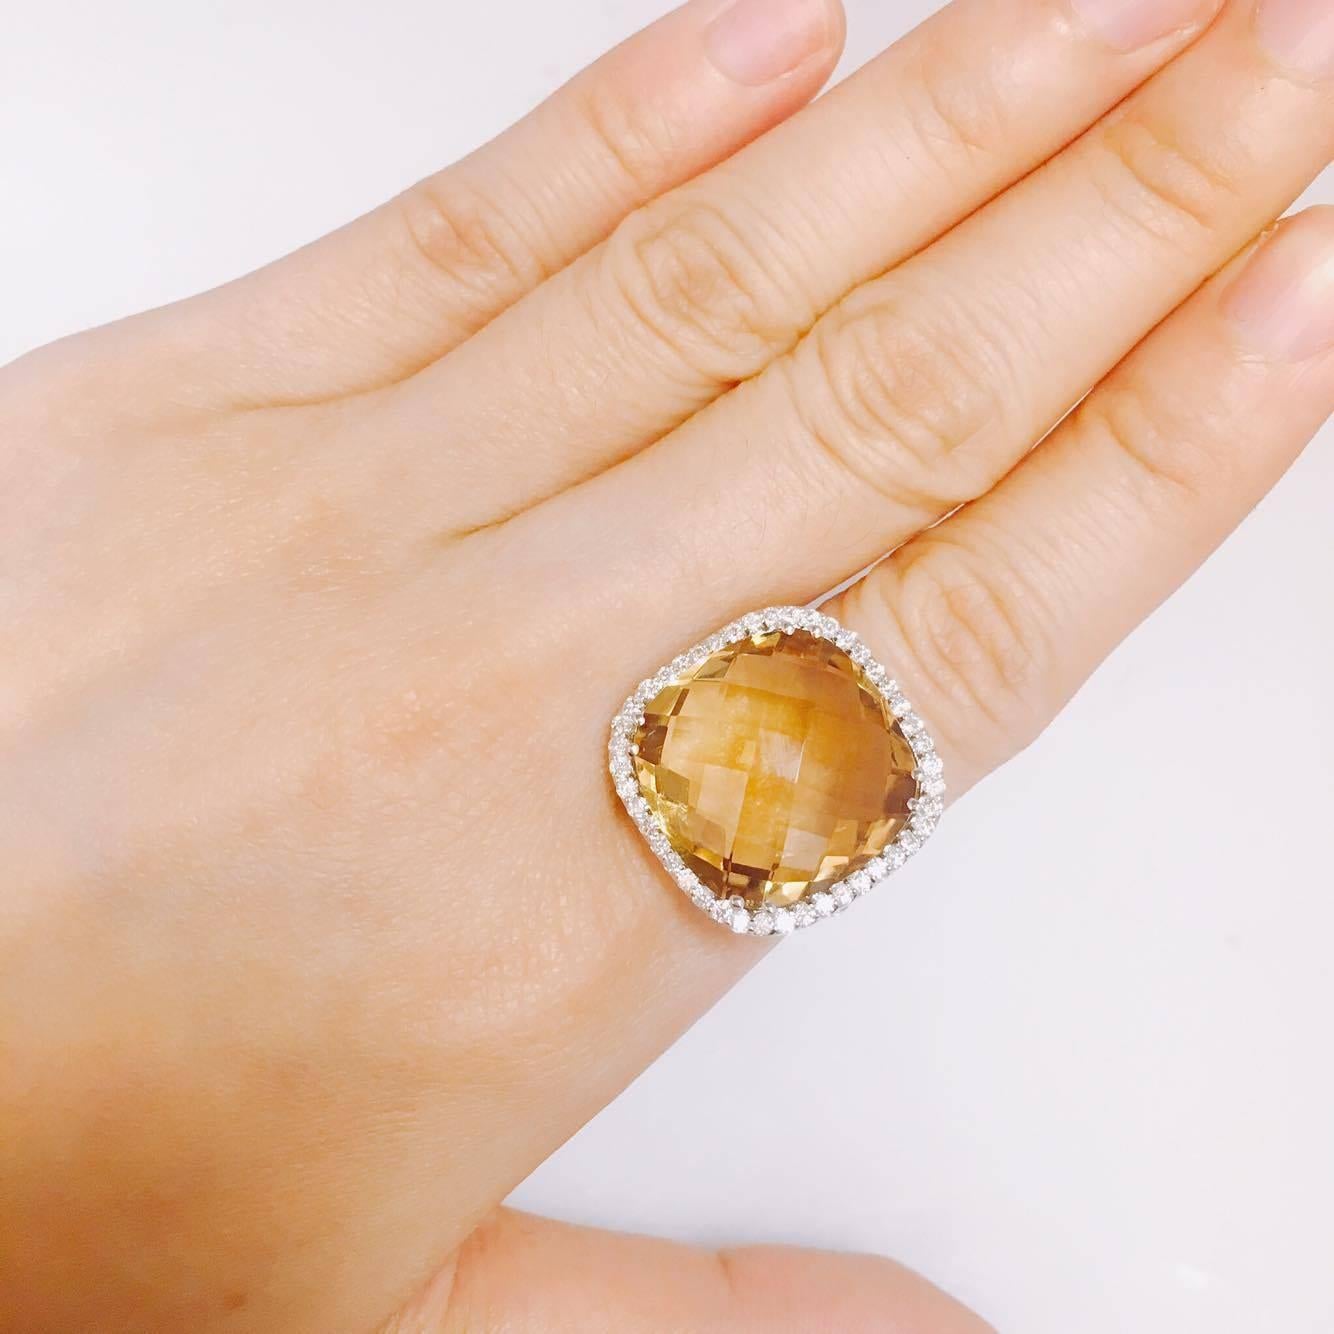 18 carat honey citrine center 
1.00ct t.w. Diamond Vs Clarity F color conflict free diamonds. If you prefer this piece in all white/yellow/rose gold and blackened gold, you can order it that way as well. 
All finger sizes available at no additional